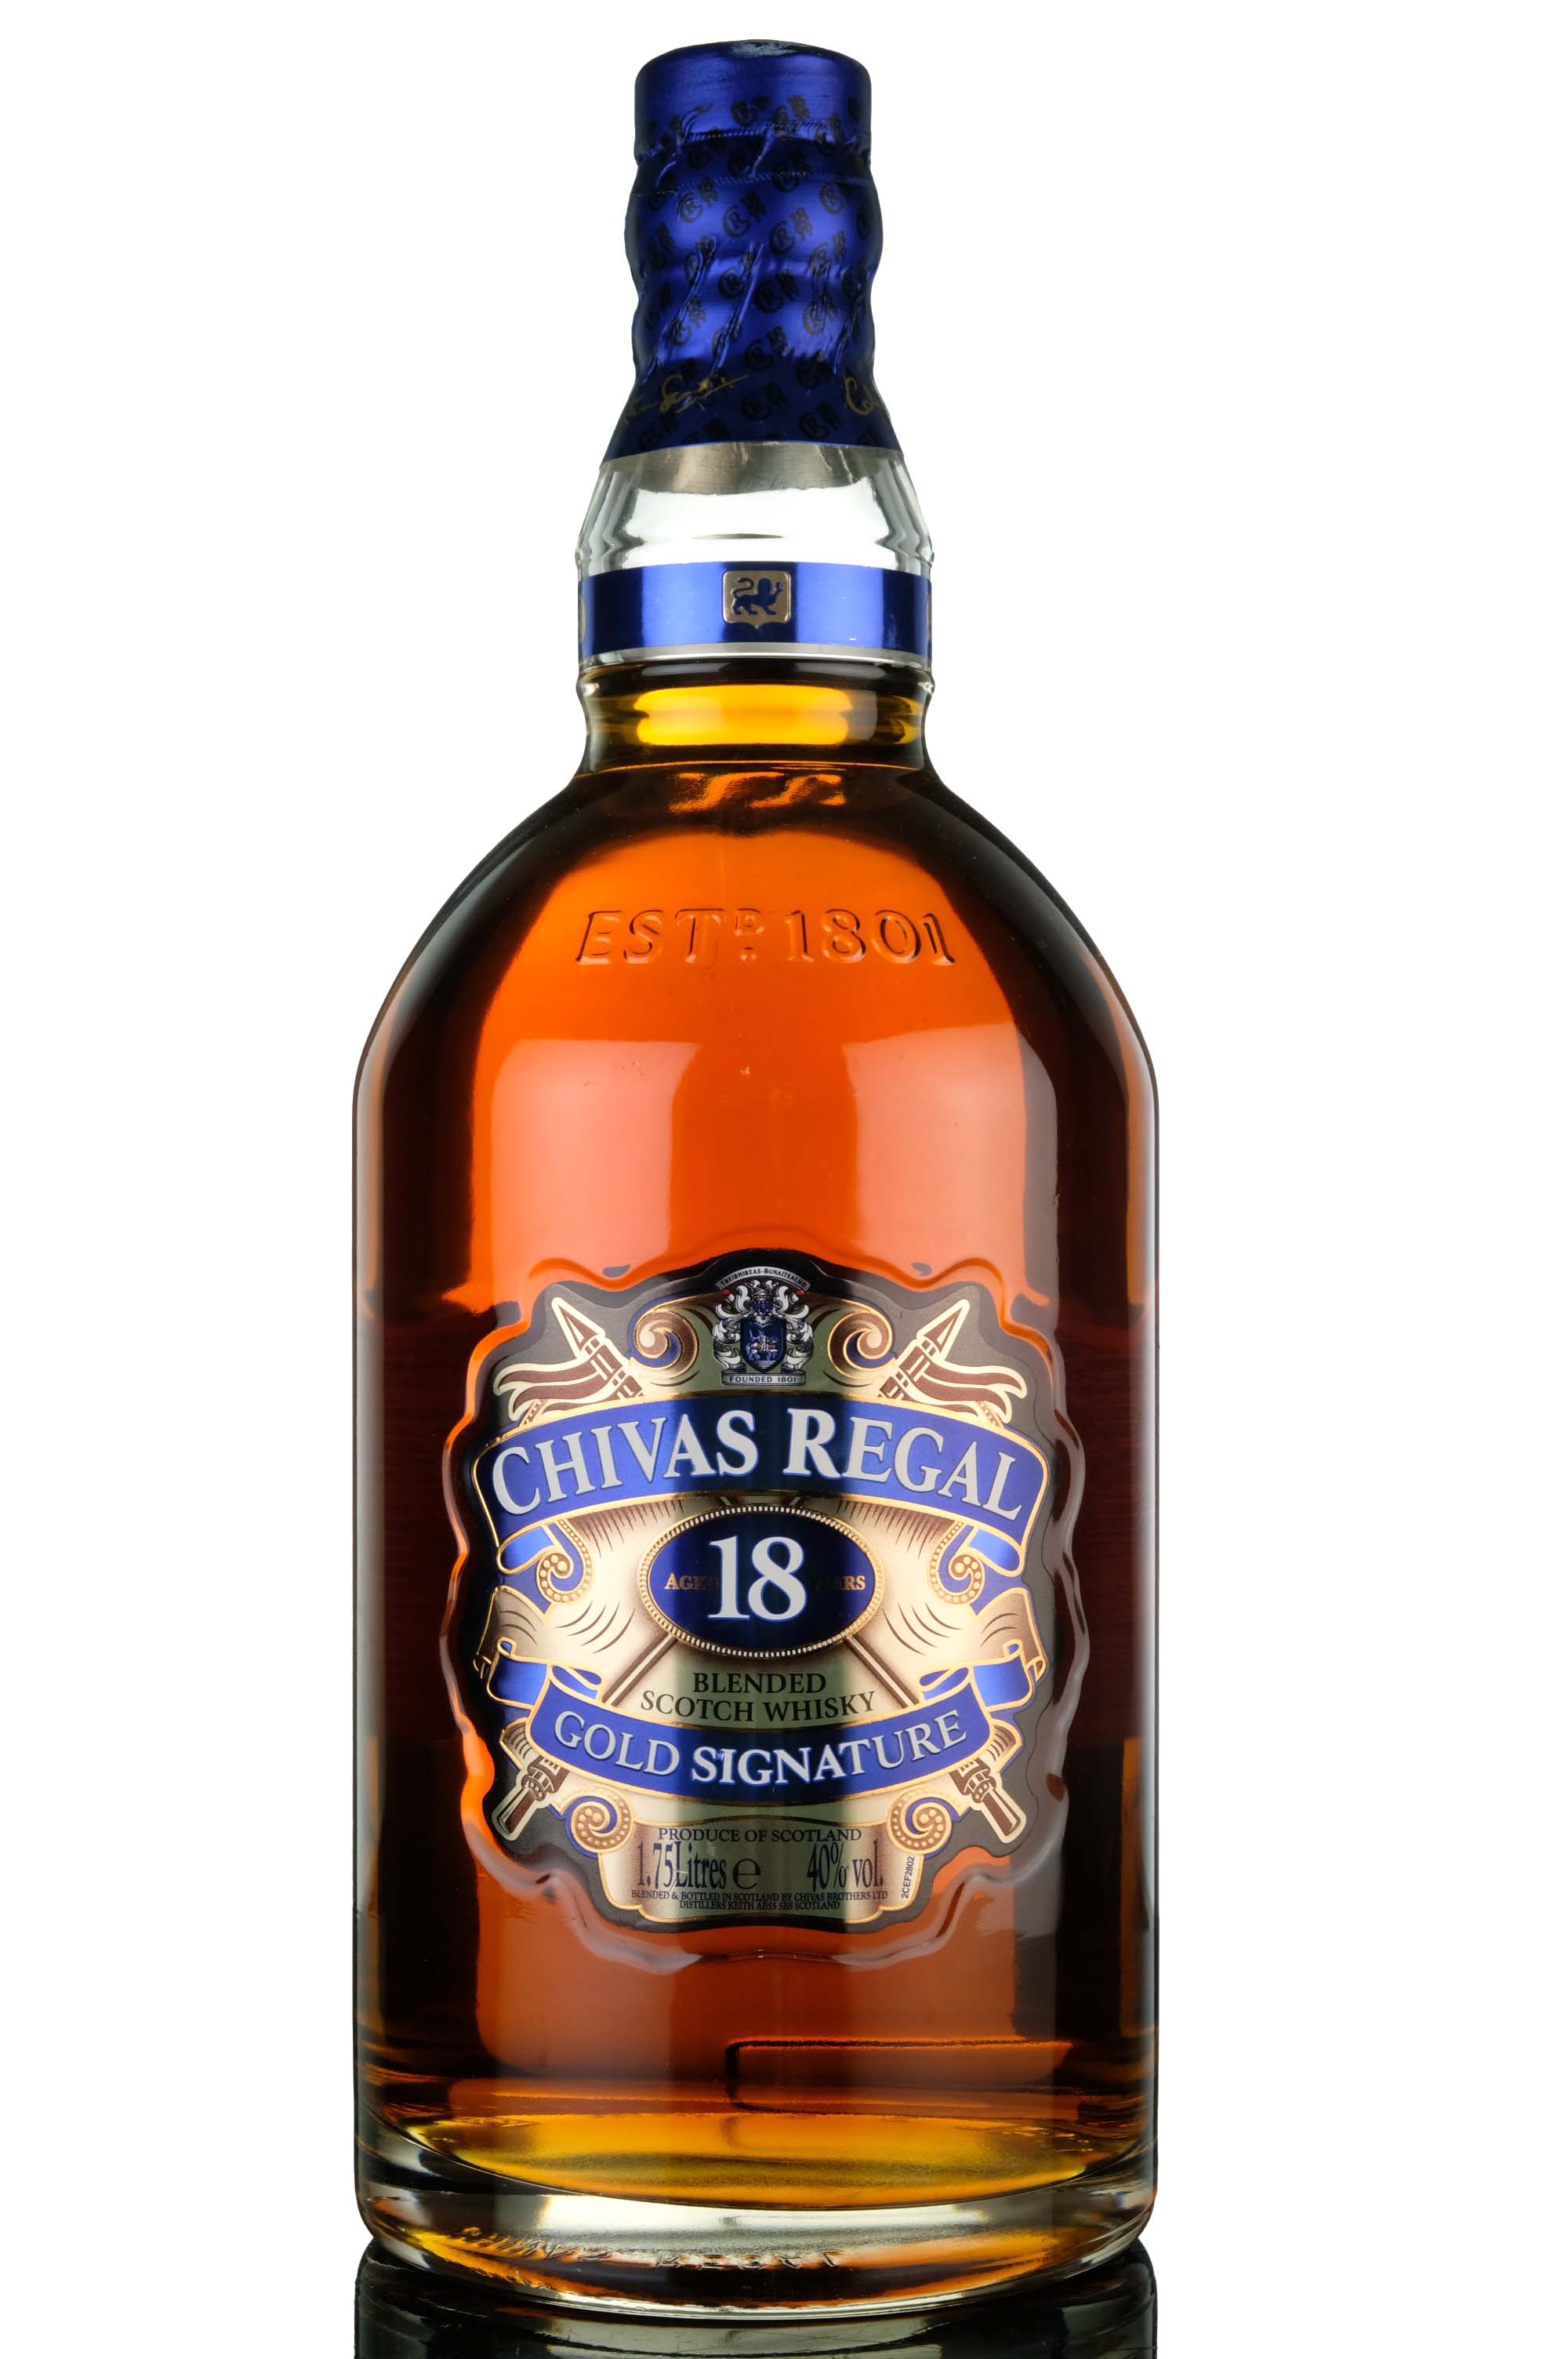 Chivas Regal 18 Year Old - Gold Signature - 2012 Release - 1.75 Litres